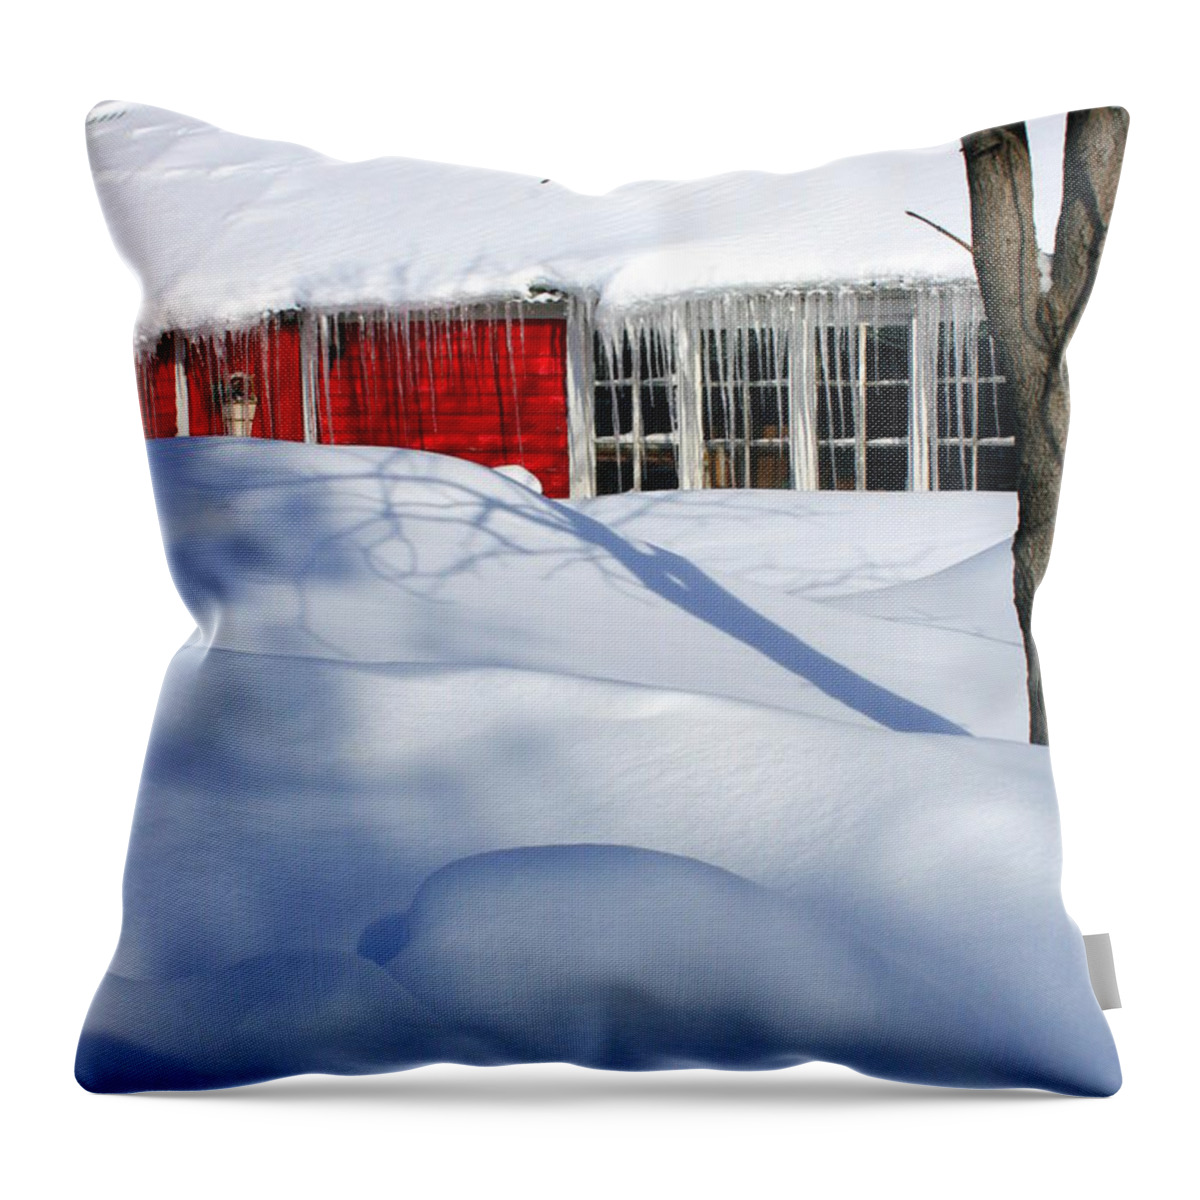 Barn Throw Pillow featuring the photograph My Summer Studio by Julie Lueders 